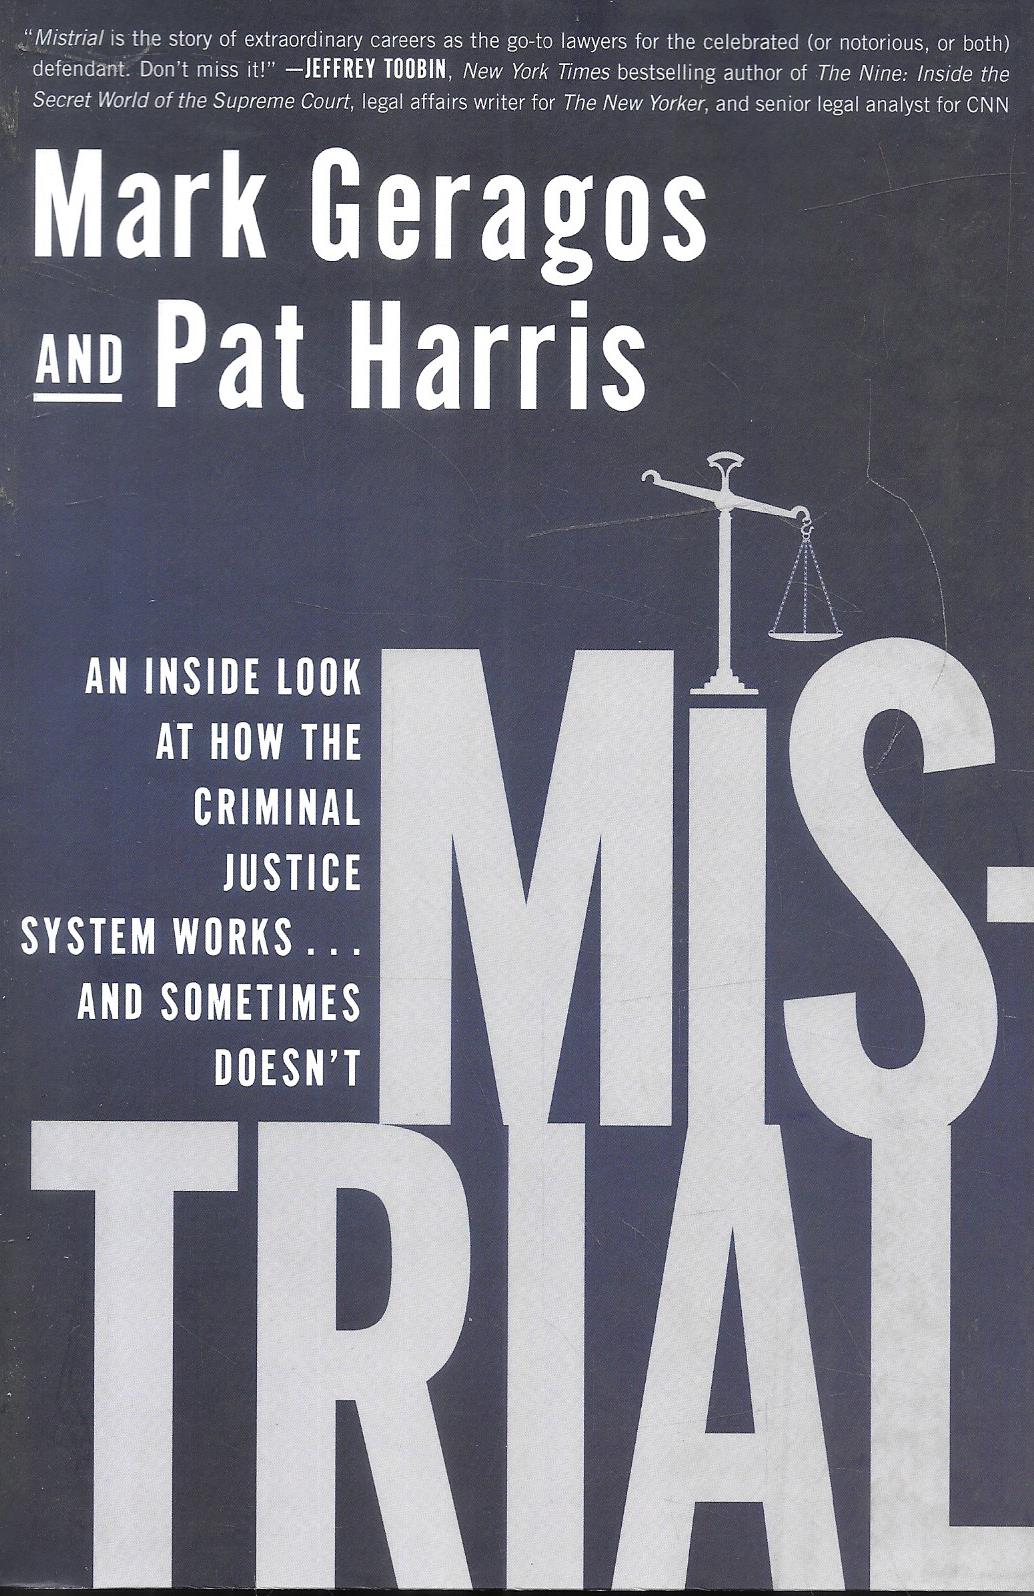 Mistrial An Inside Look At How The Criminal Justice System Works And Sometimes Doesn't